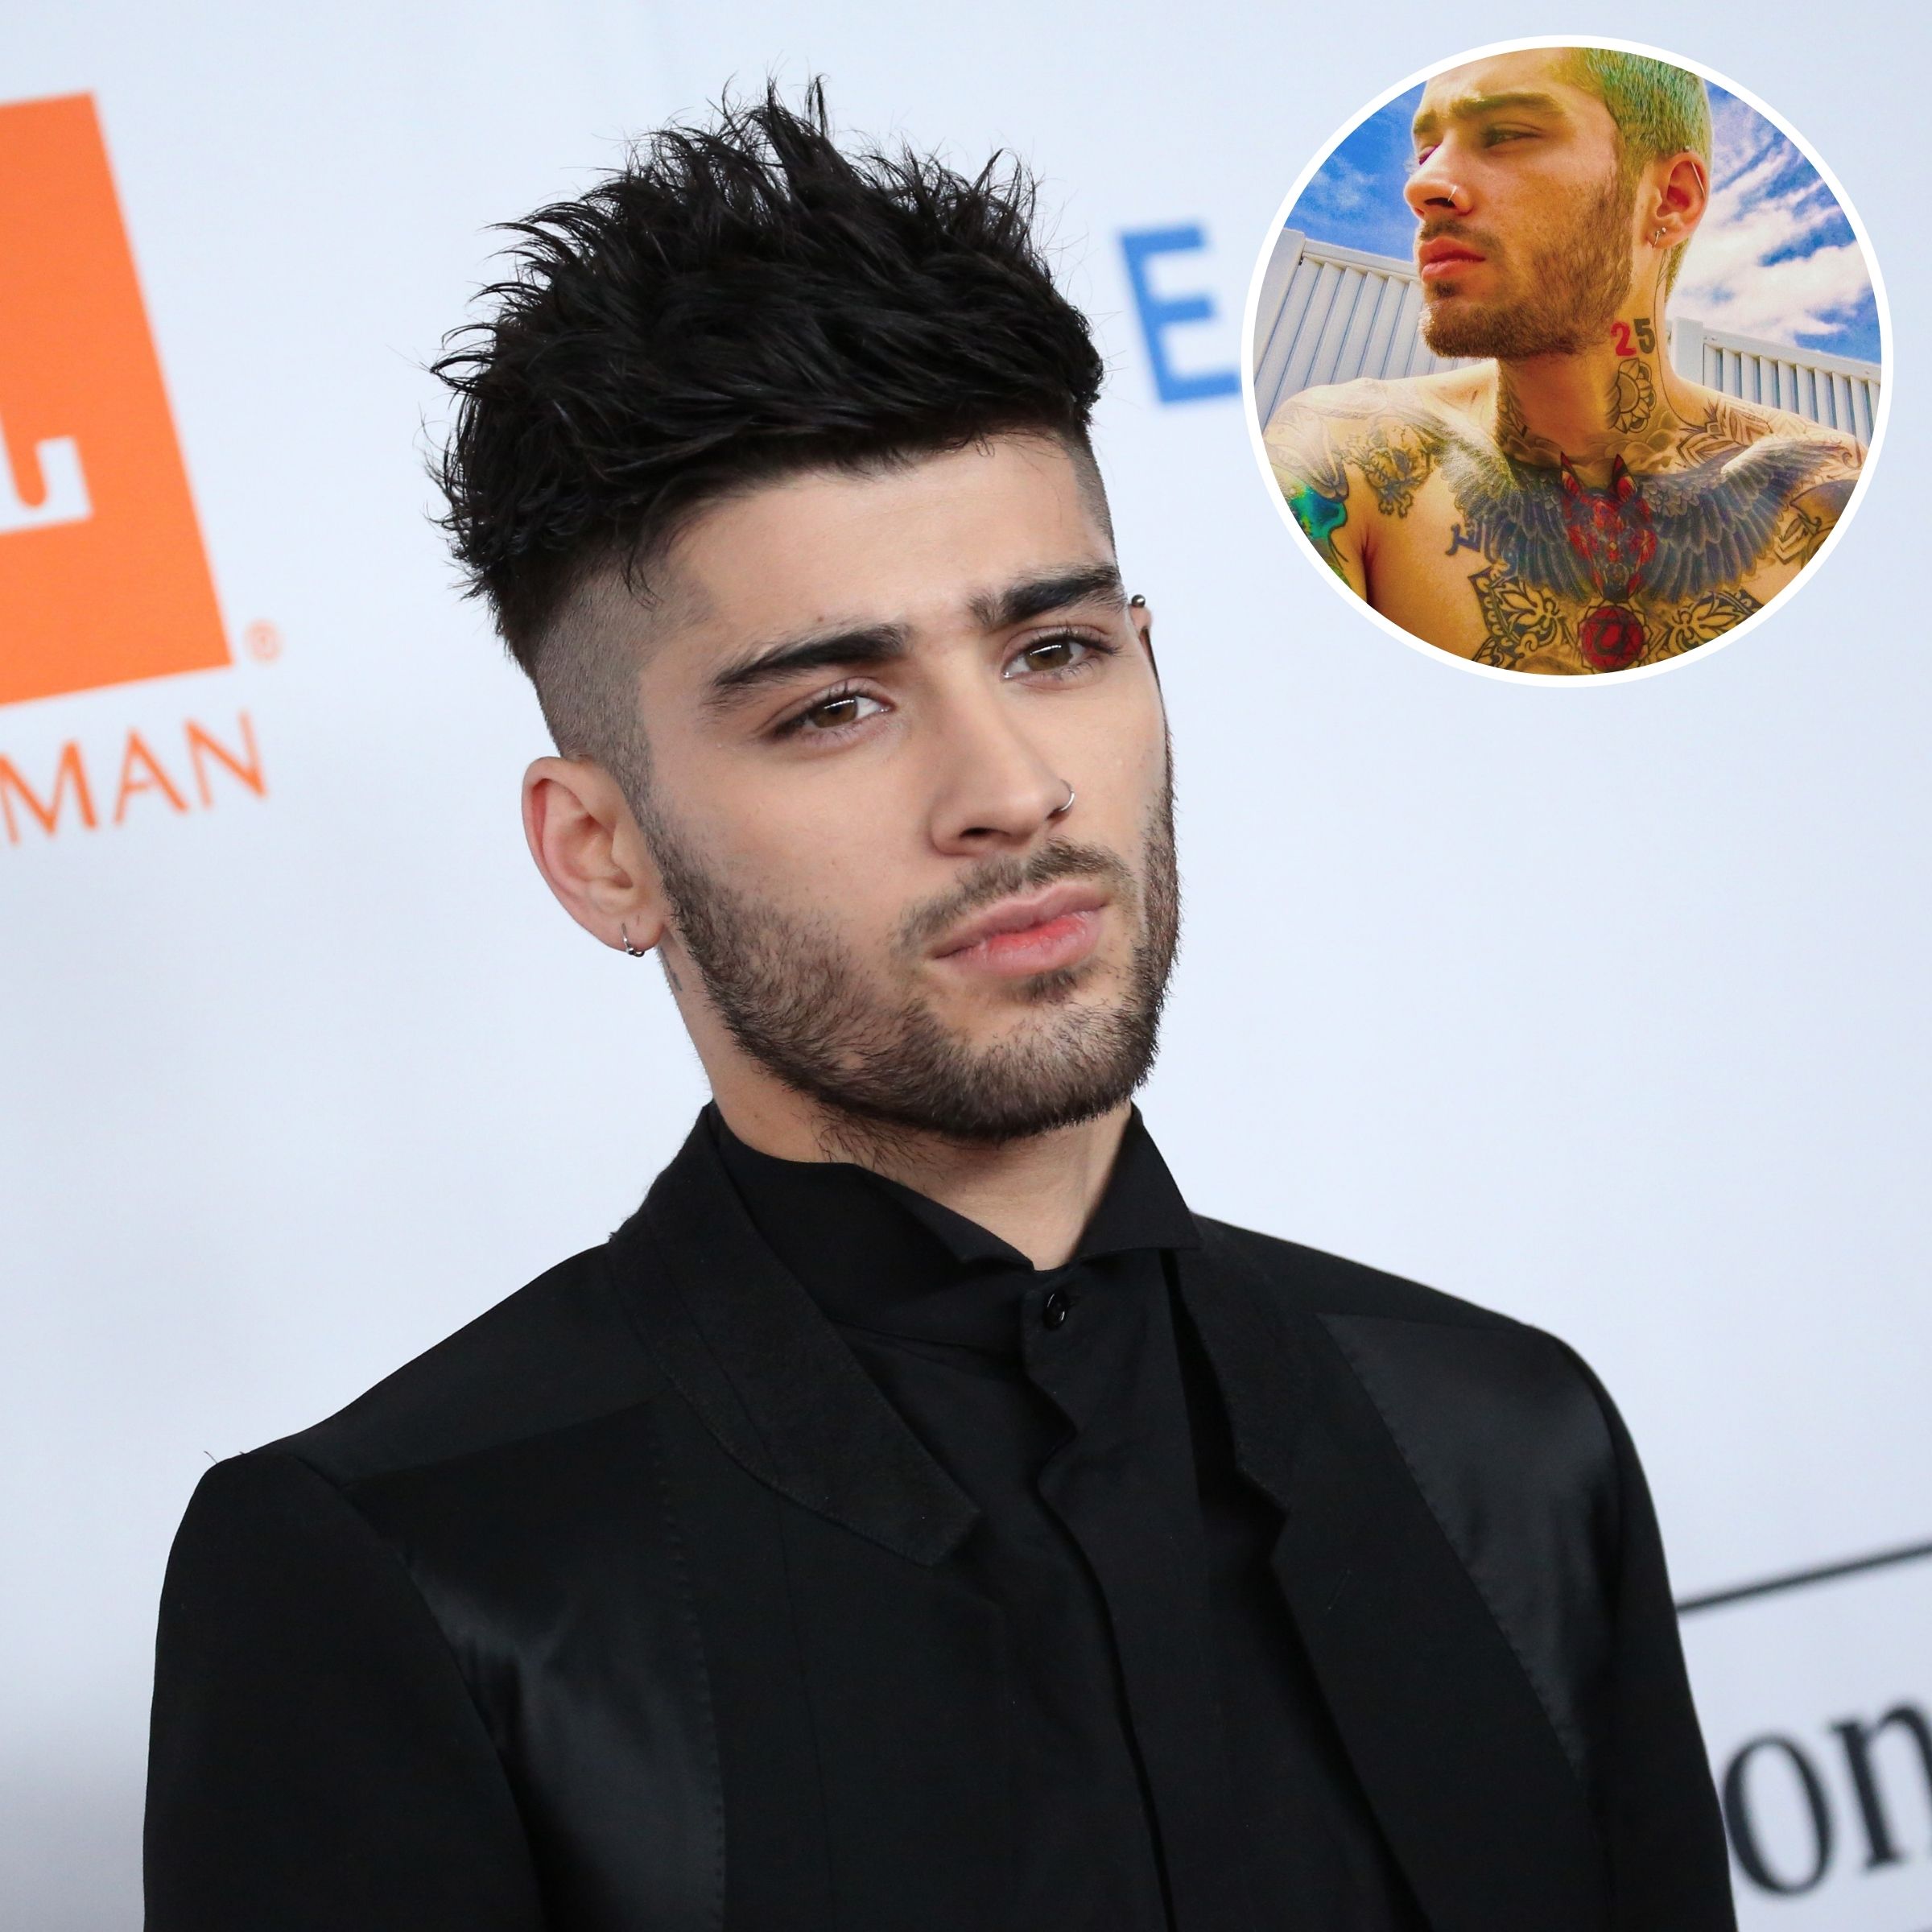 Zayn Malik 60+ Tattoos: Photos and Meanings Behind His Ink